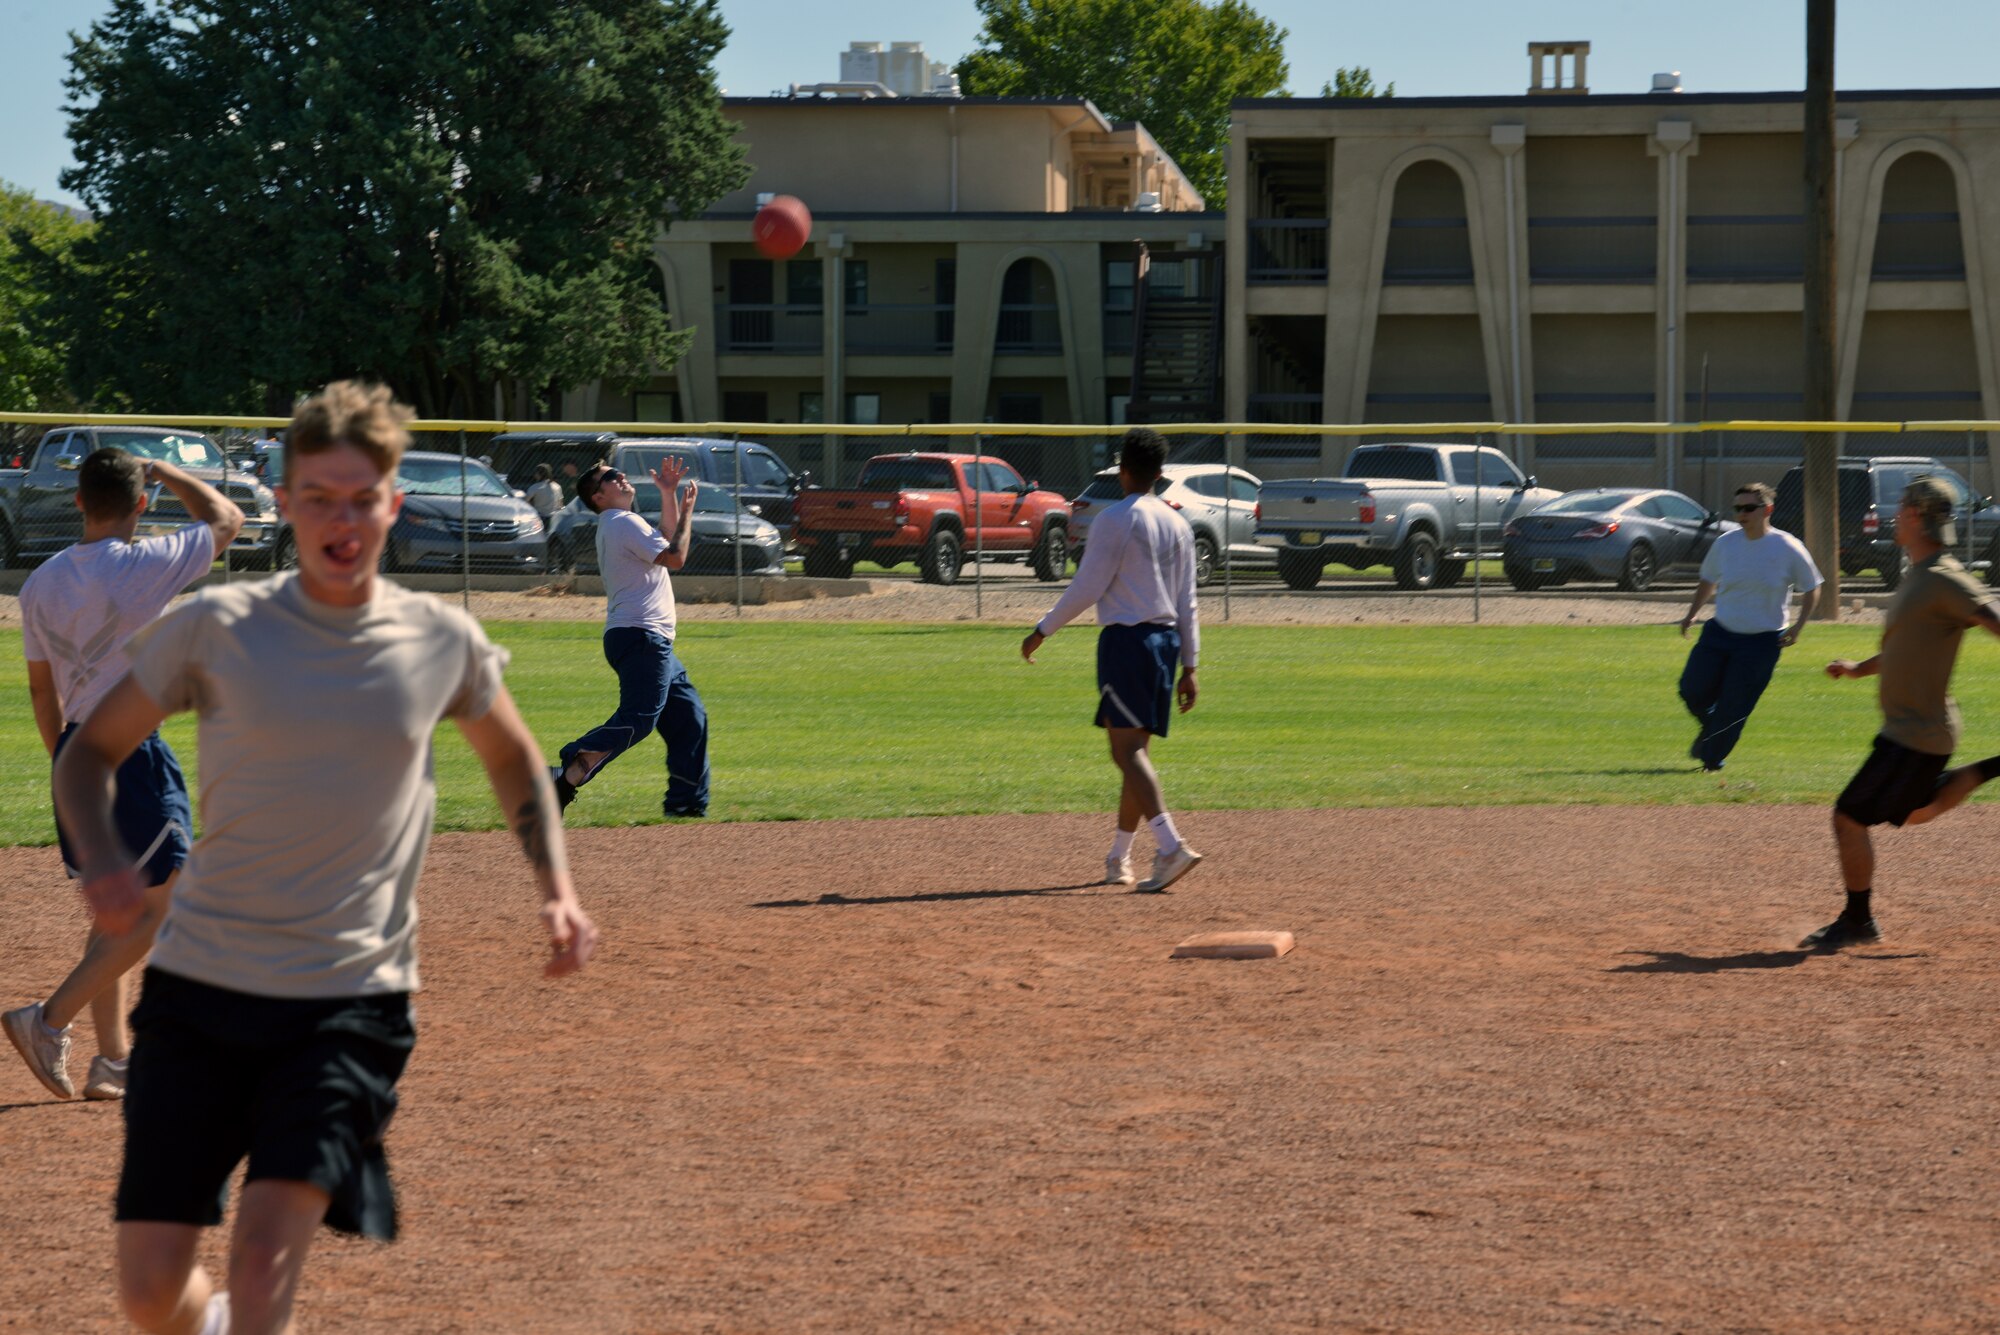 Members of the 58th Special Operations Wing play kickball during the 2019 58 SOW Sports Day at Kirtland Air Force Base, N.M., Sept. 27, 2019. Other sports played throughout the day included basketball, kickball, volleyball and more. The sports day included a competition between all the squadrons in the wing with top placements in every sport earning points for the unit. The 58th Aircraft Maintenance Squadron won the competition with almost double the points of the second place squadron.